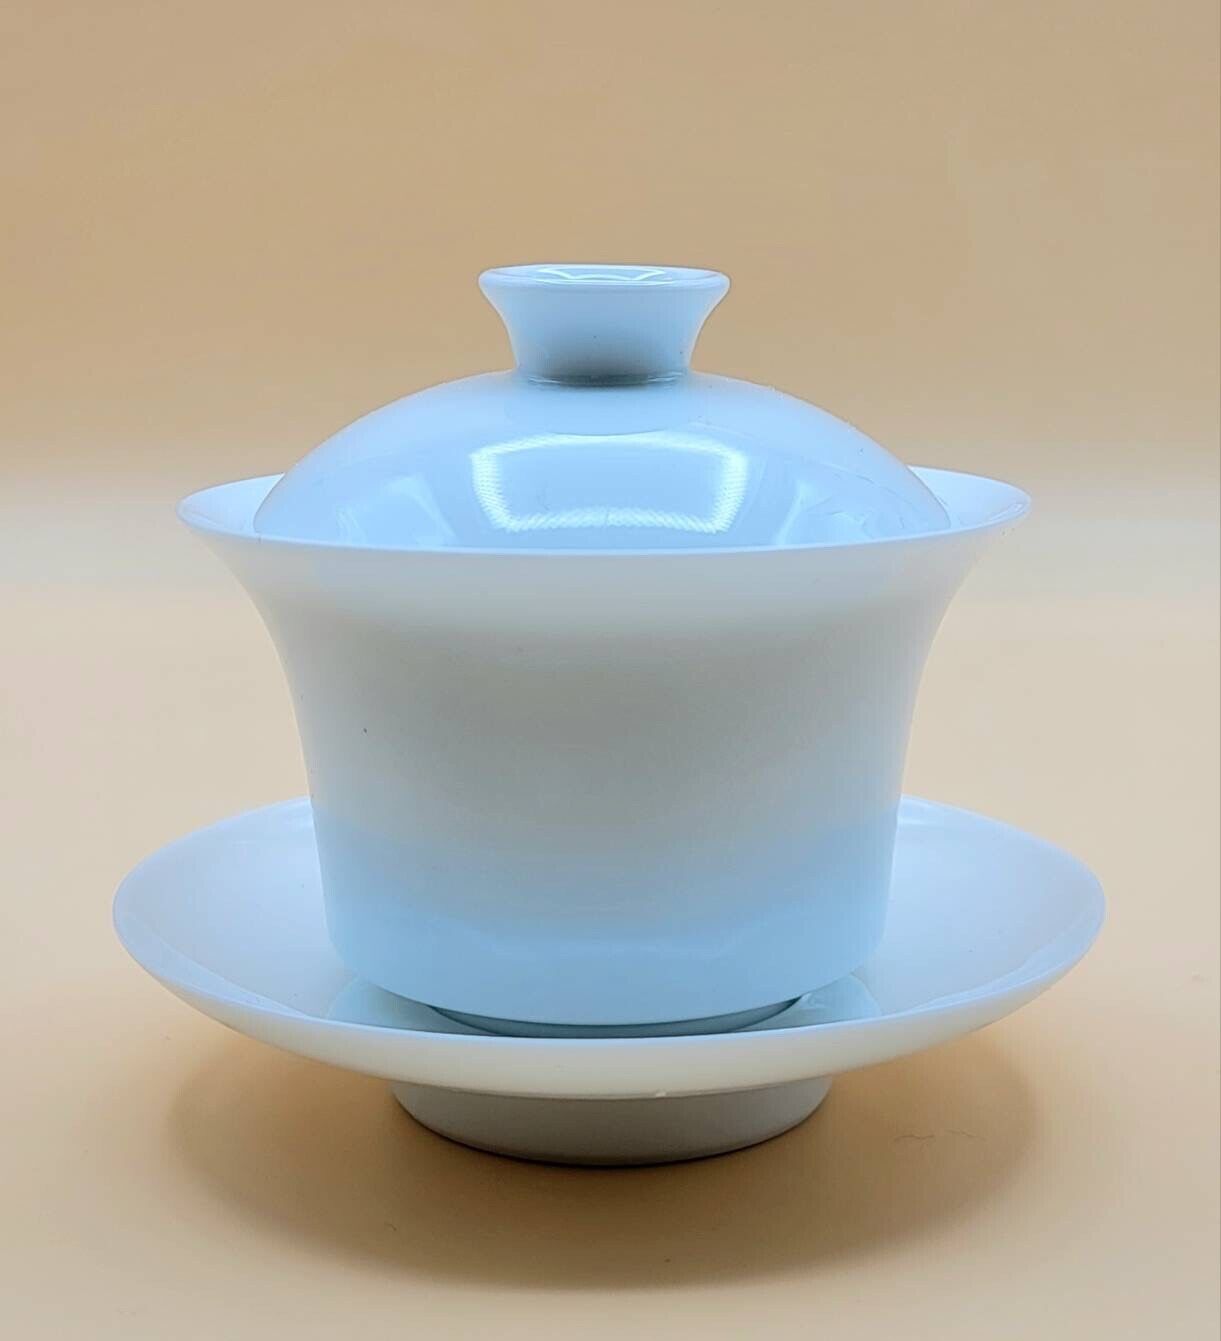 Gaiwan Tea Set - Premium White Porcelain Cup & Plate - Great for Pouring Any Tea